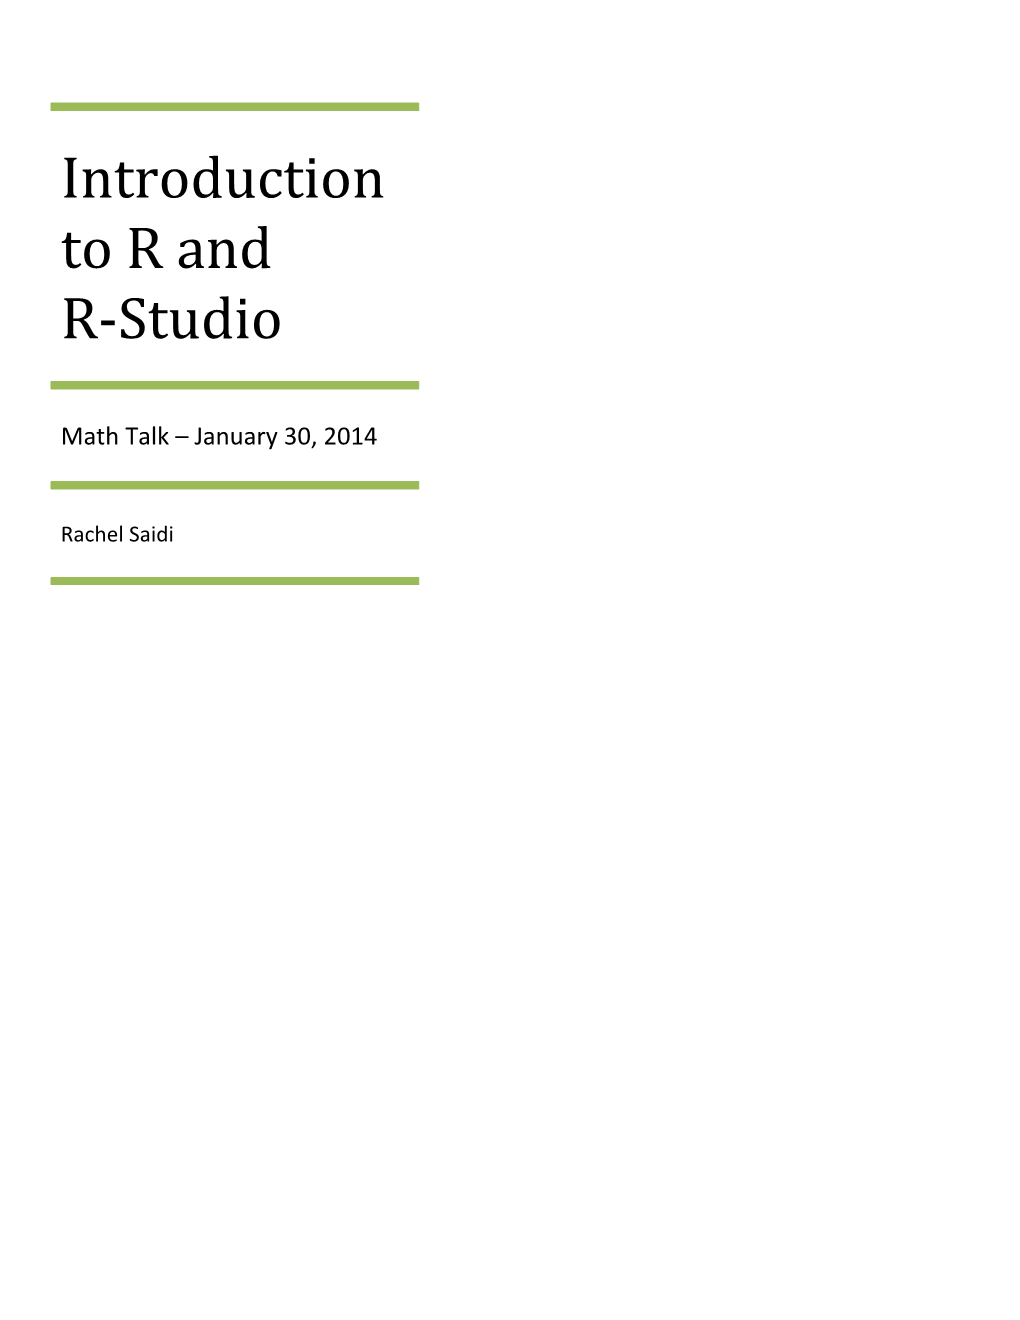 Introduction to R and R-Studio